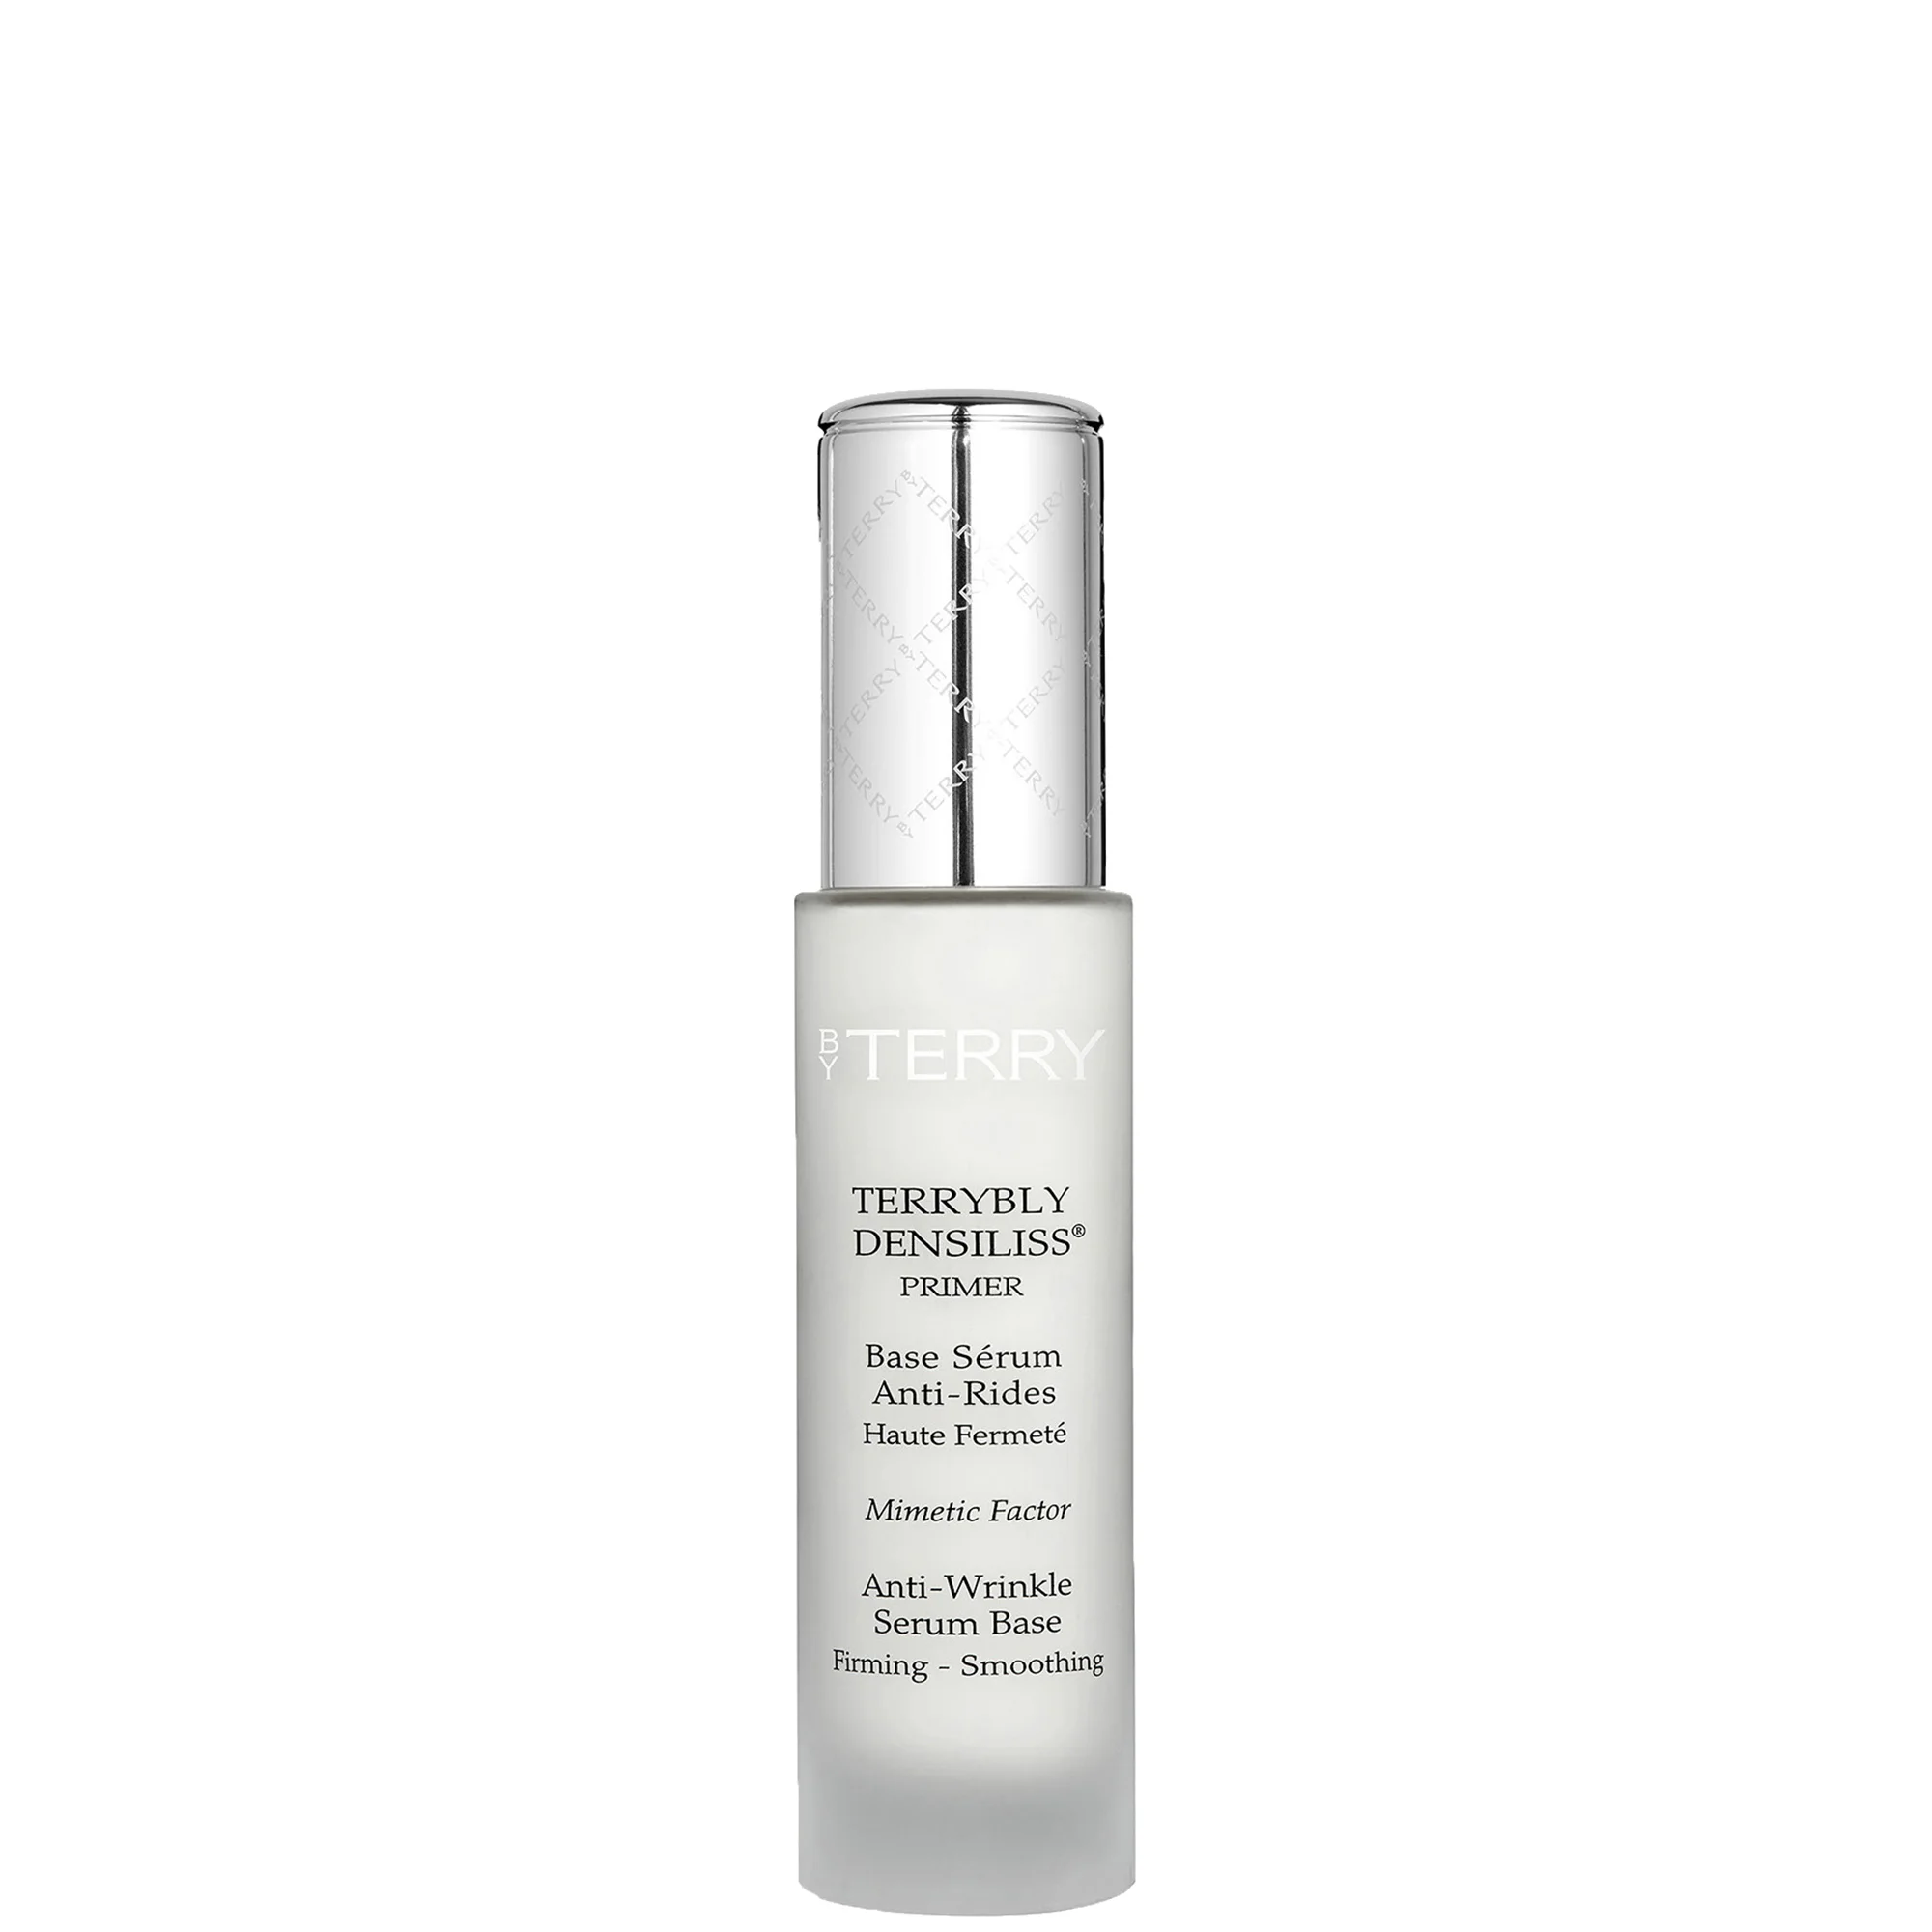 By Terry Terrybly Densiliss Primer 30ml Image 1